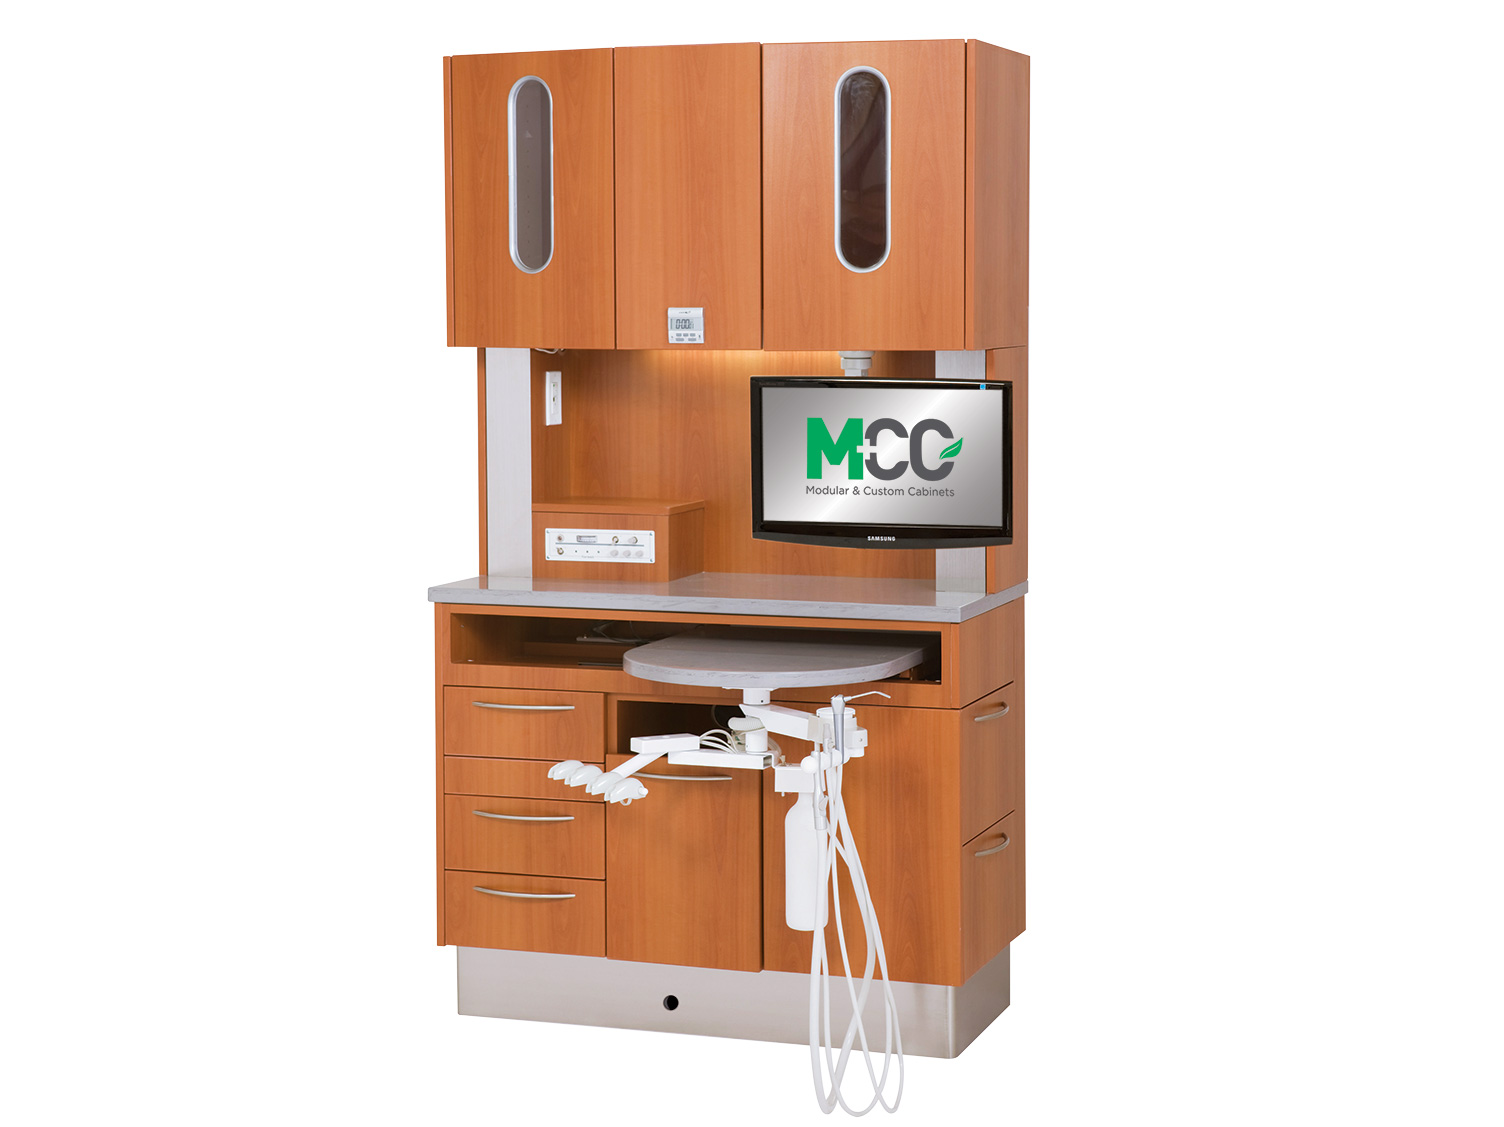 Perfect Fit Rear Cabinets Mcc Dental